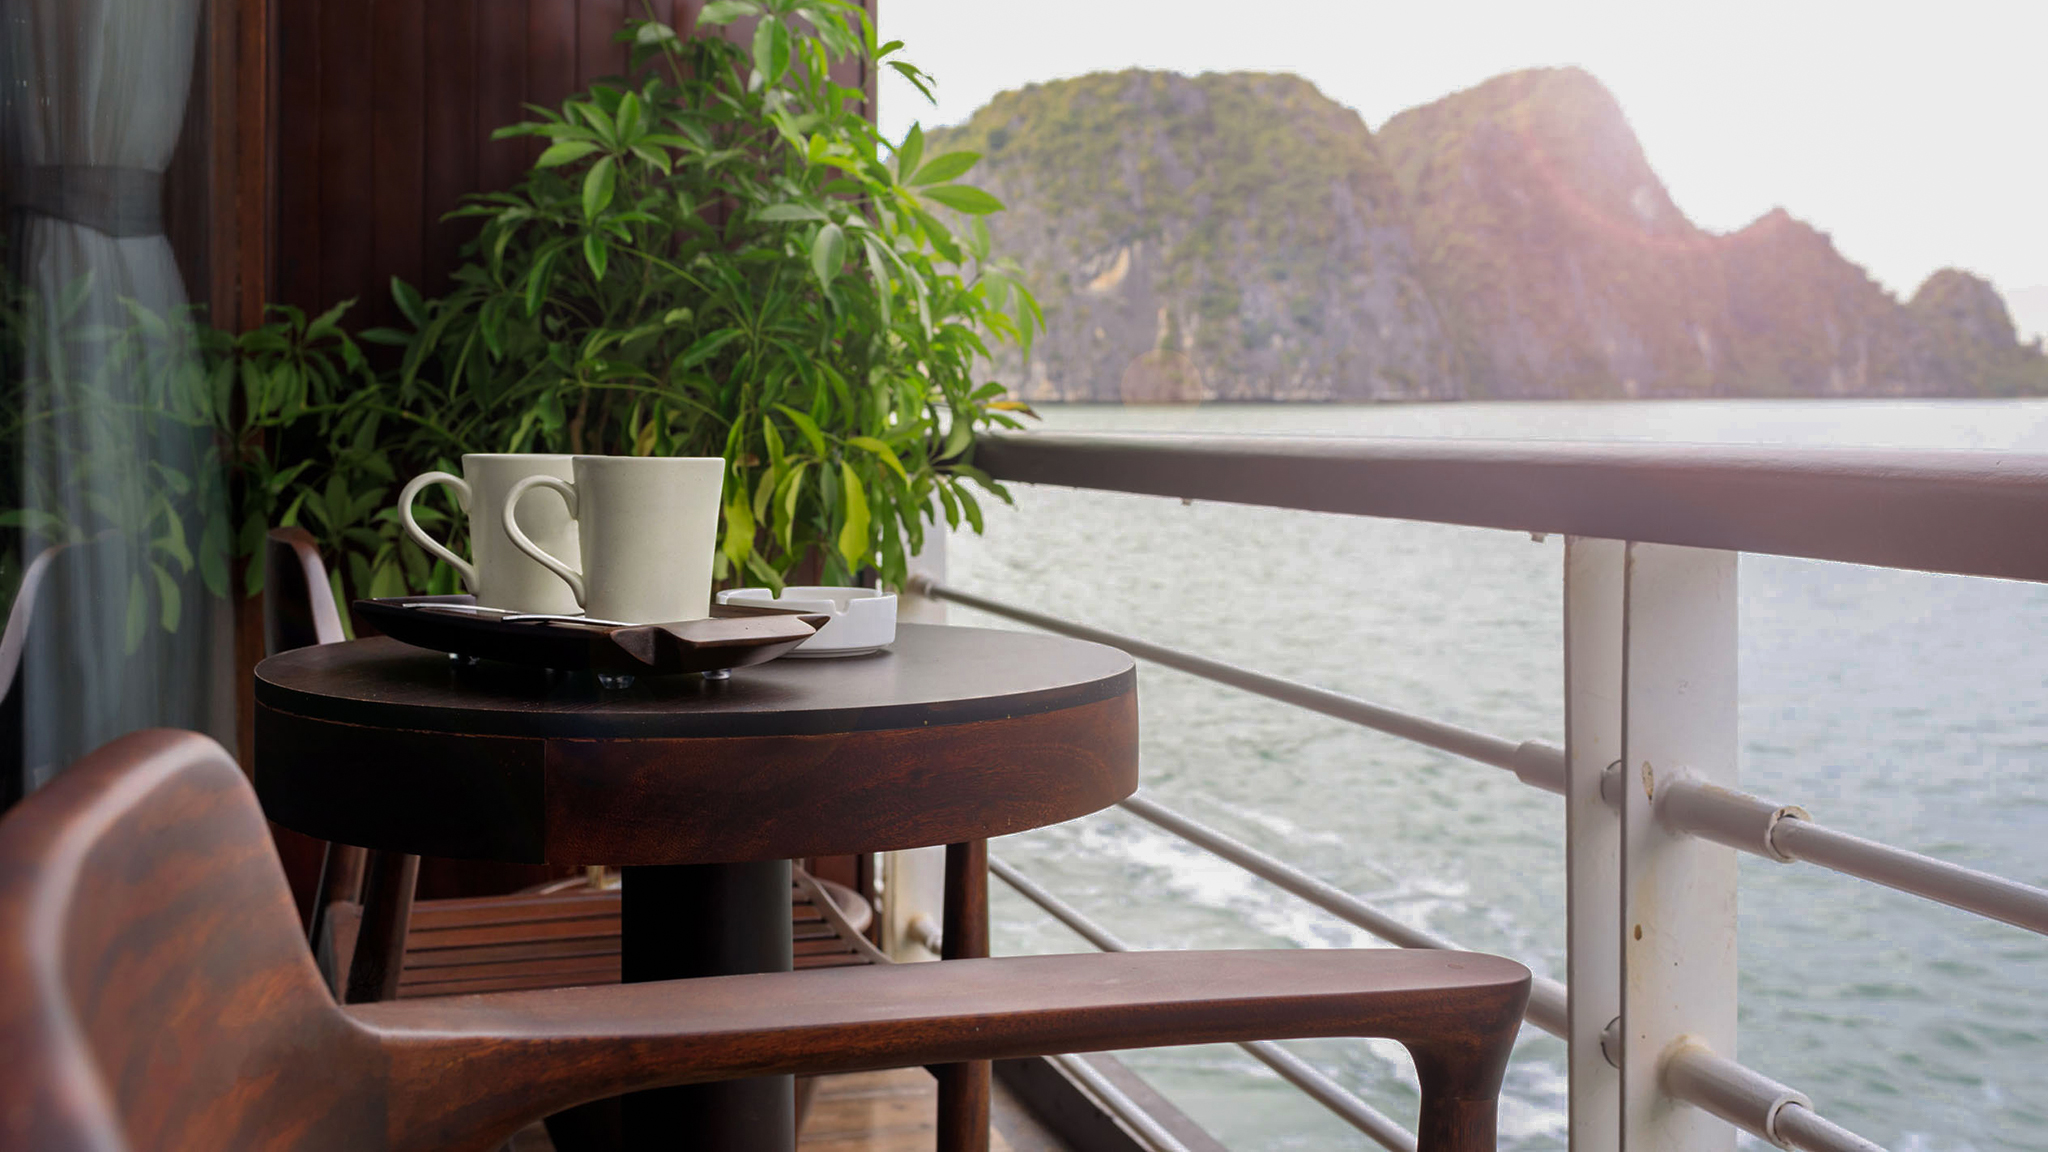 Relaxing space to admire Lan Ha Bay view